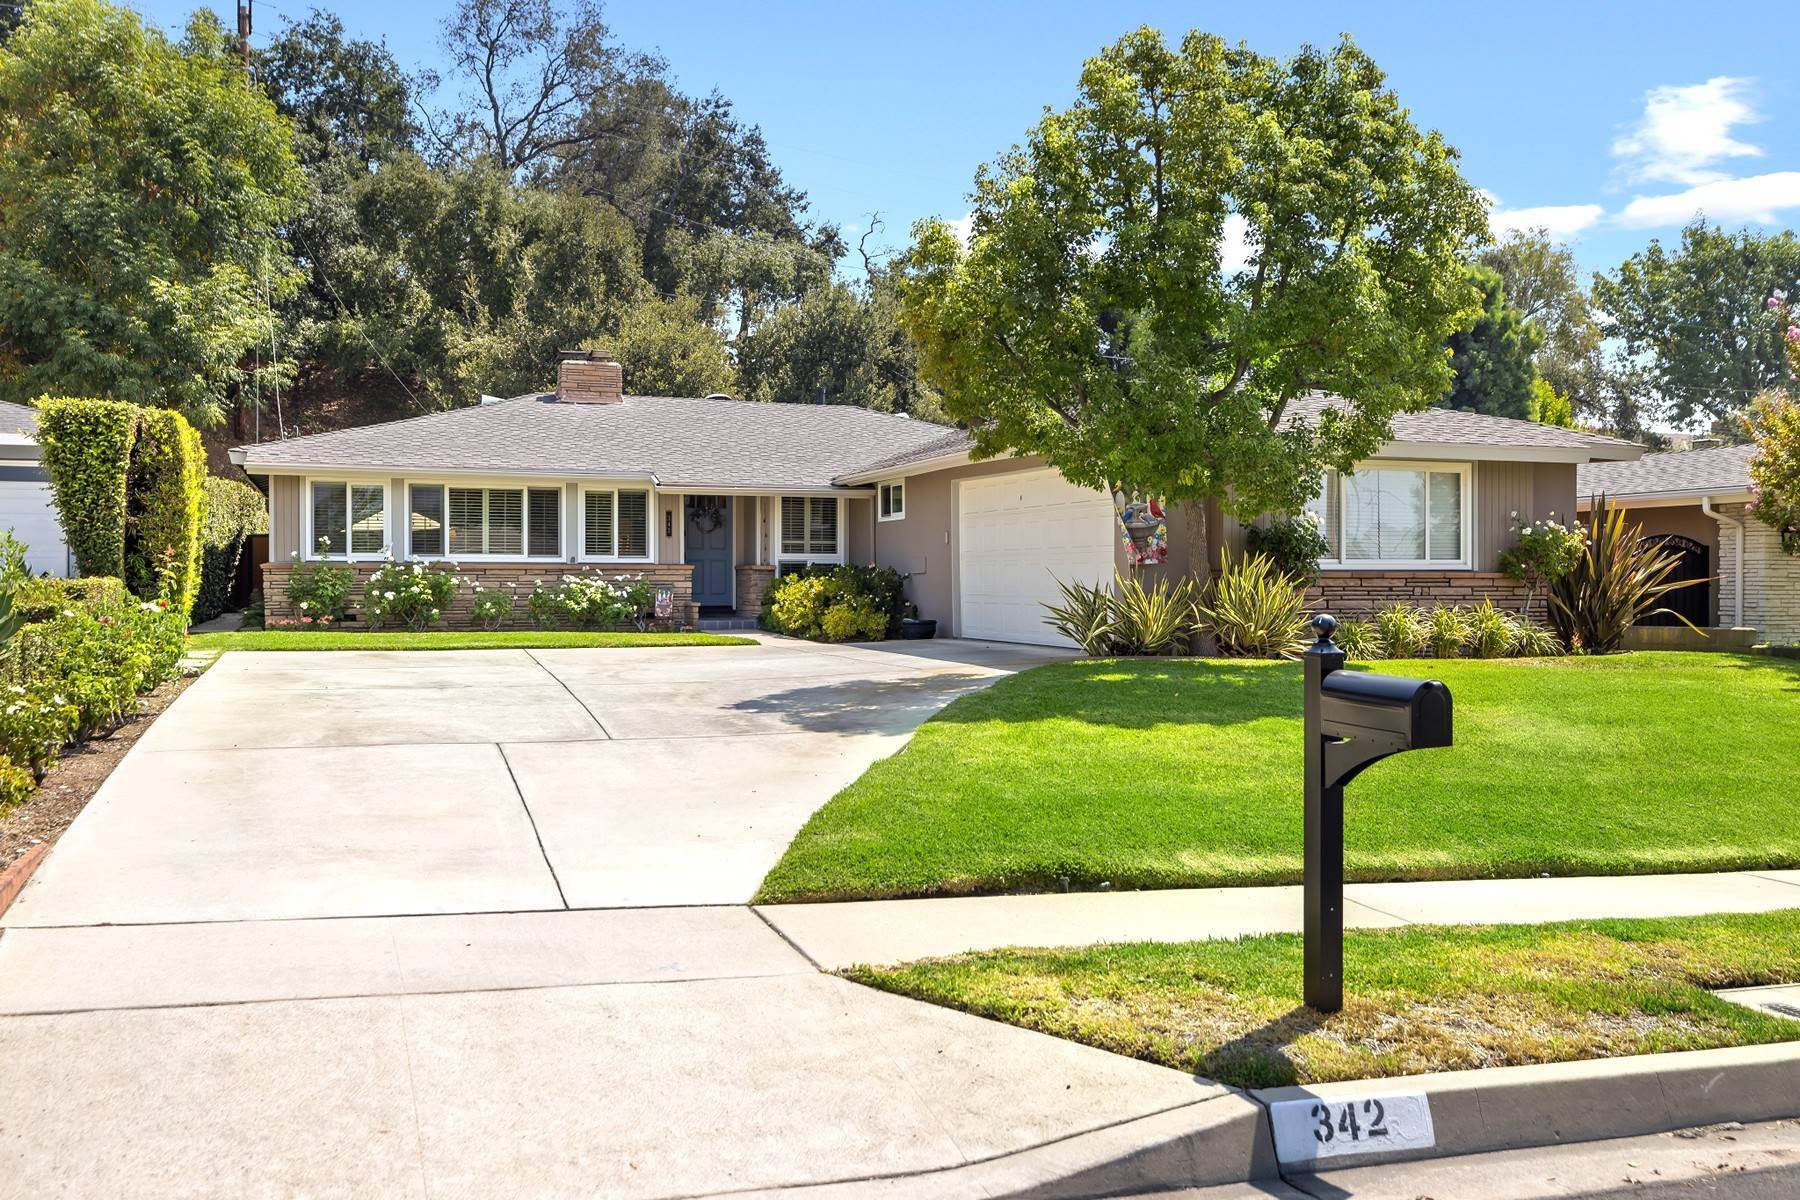 3. Single Family Homes for Sale at 342 Oakcliff Road, Monrovia, CA 91016 342 Oakcliff Road Monrovia, California 91016 United States